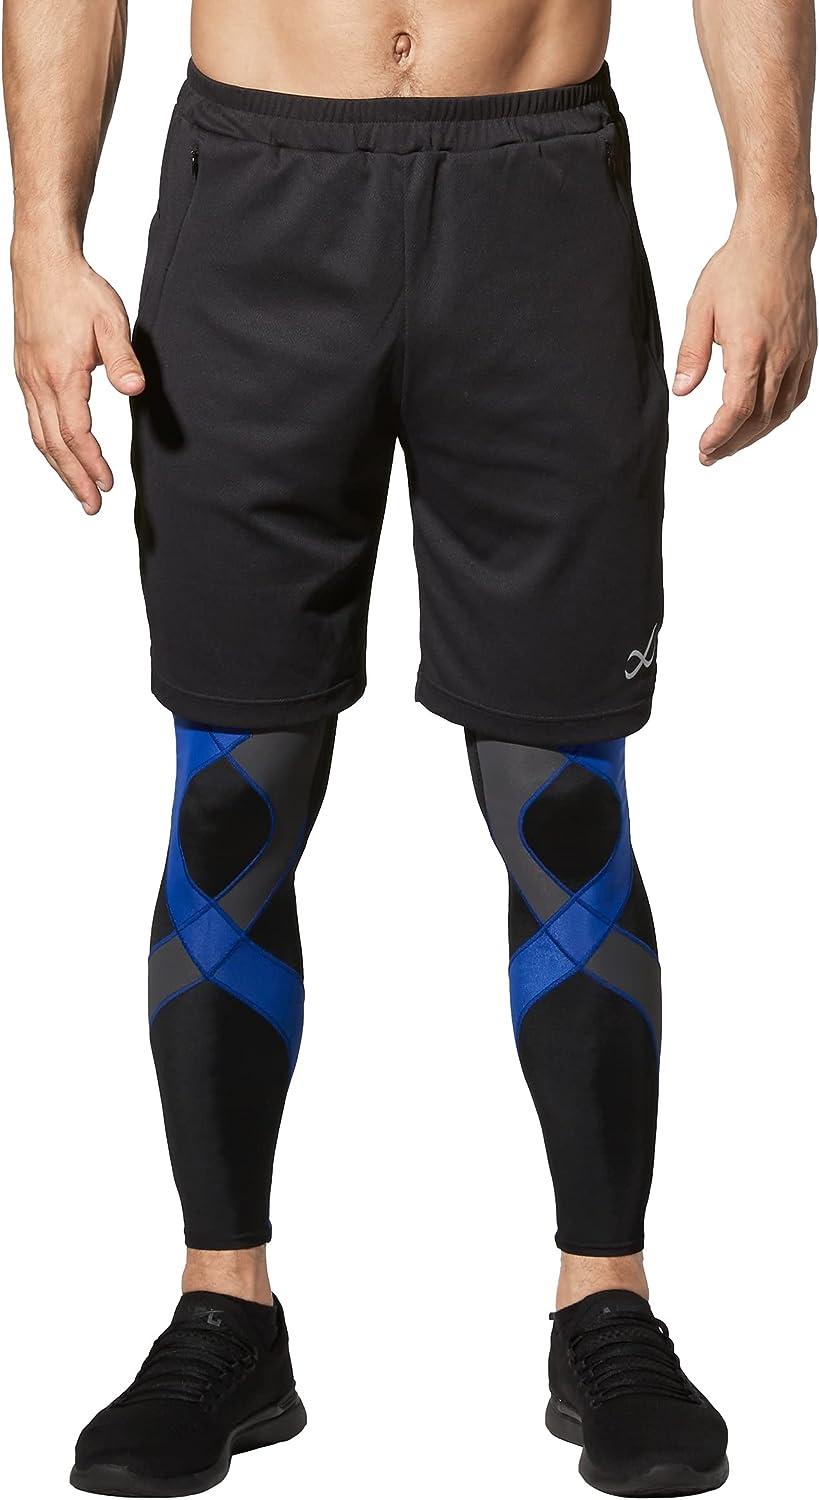 CW-X Men's Stabilyx Joint Support Compression Sports Tights, Black